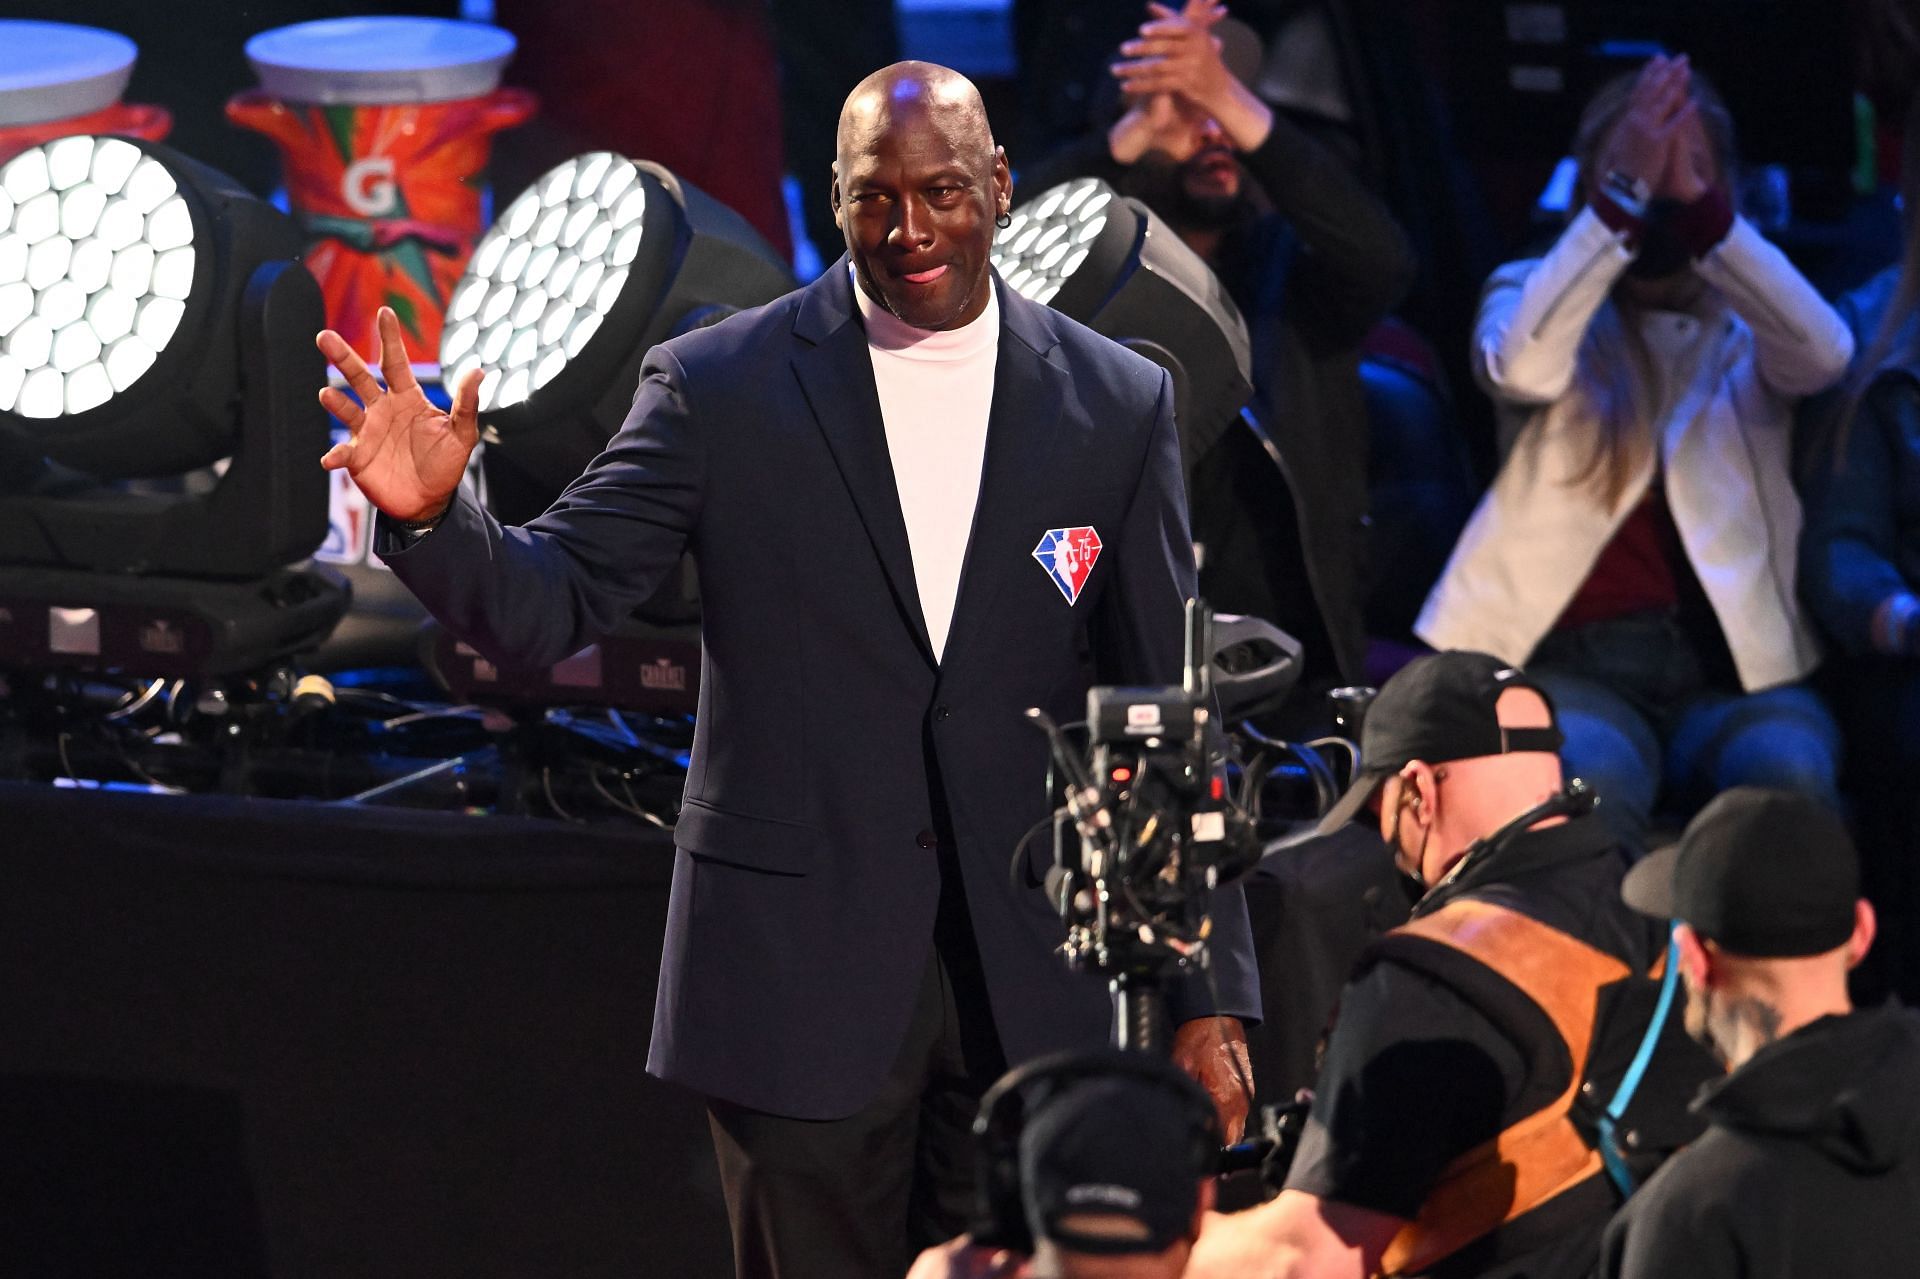 Michael Jordan attending the NBA 75 ceremony during the 2022 NBA All-Star Game